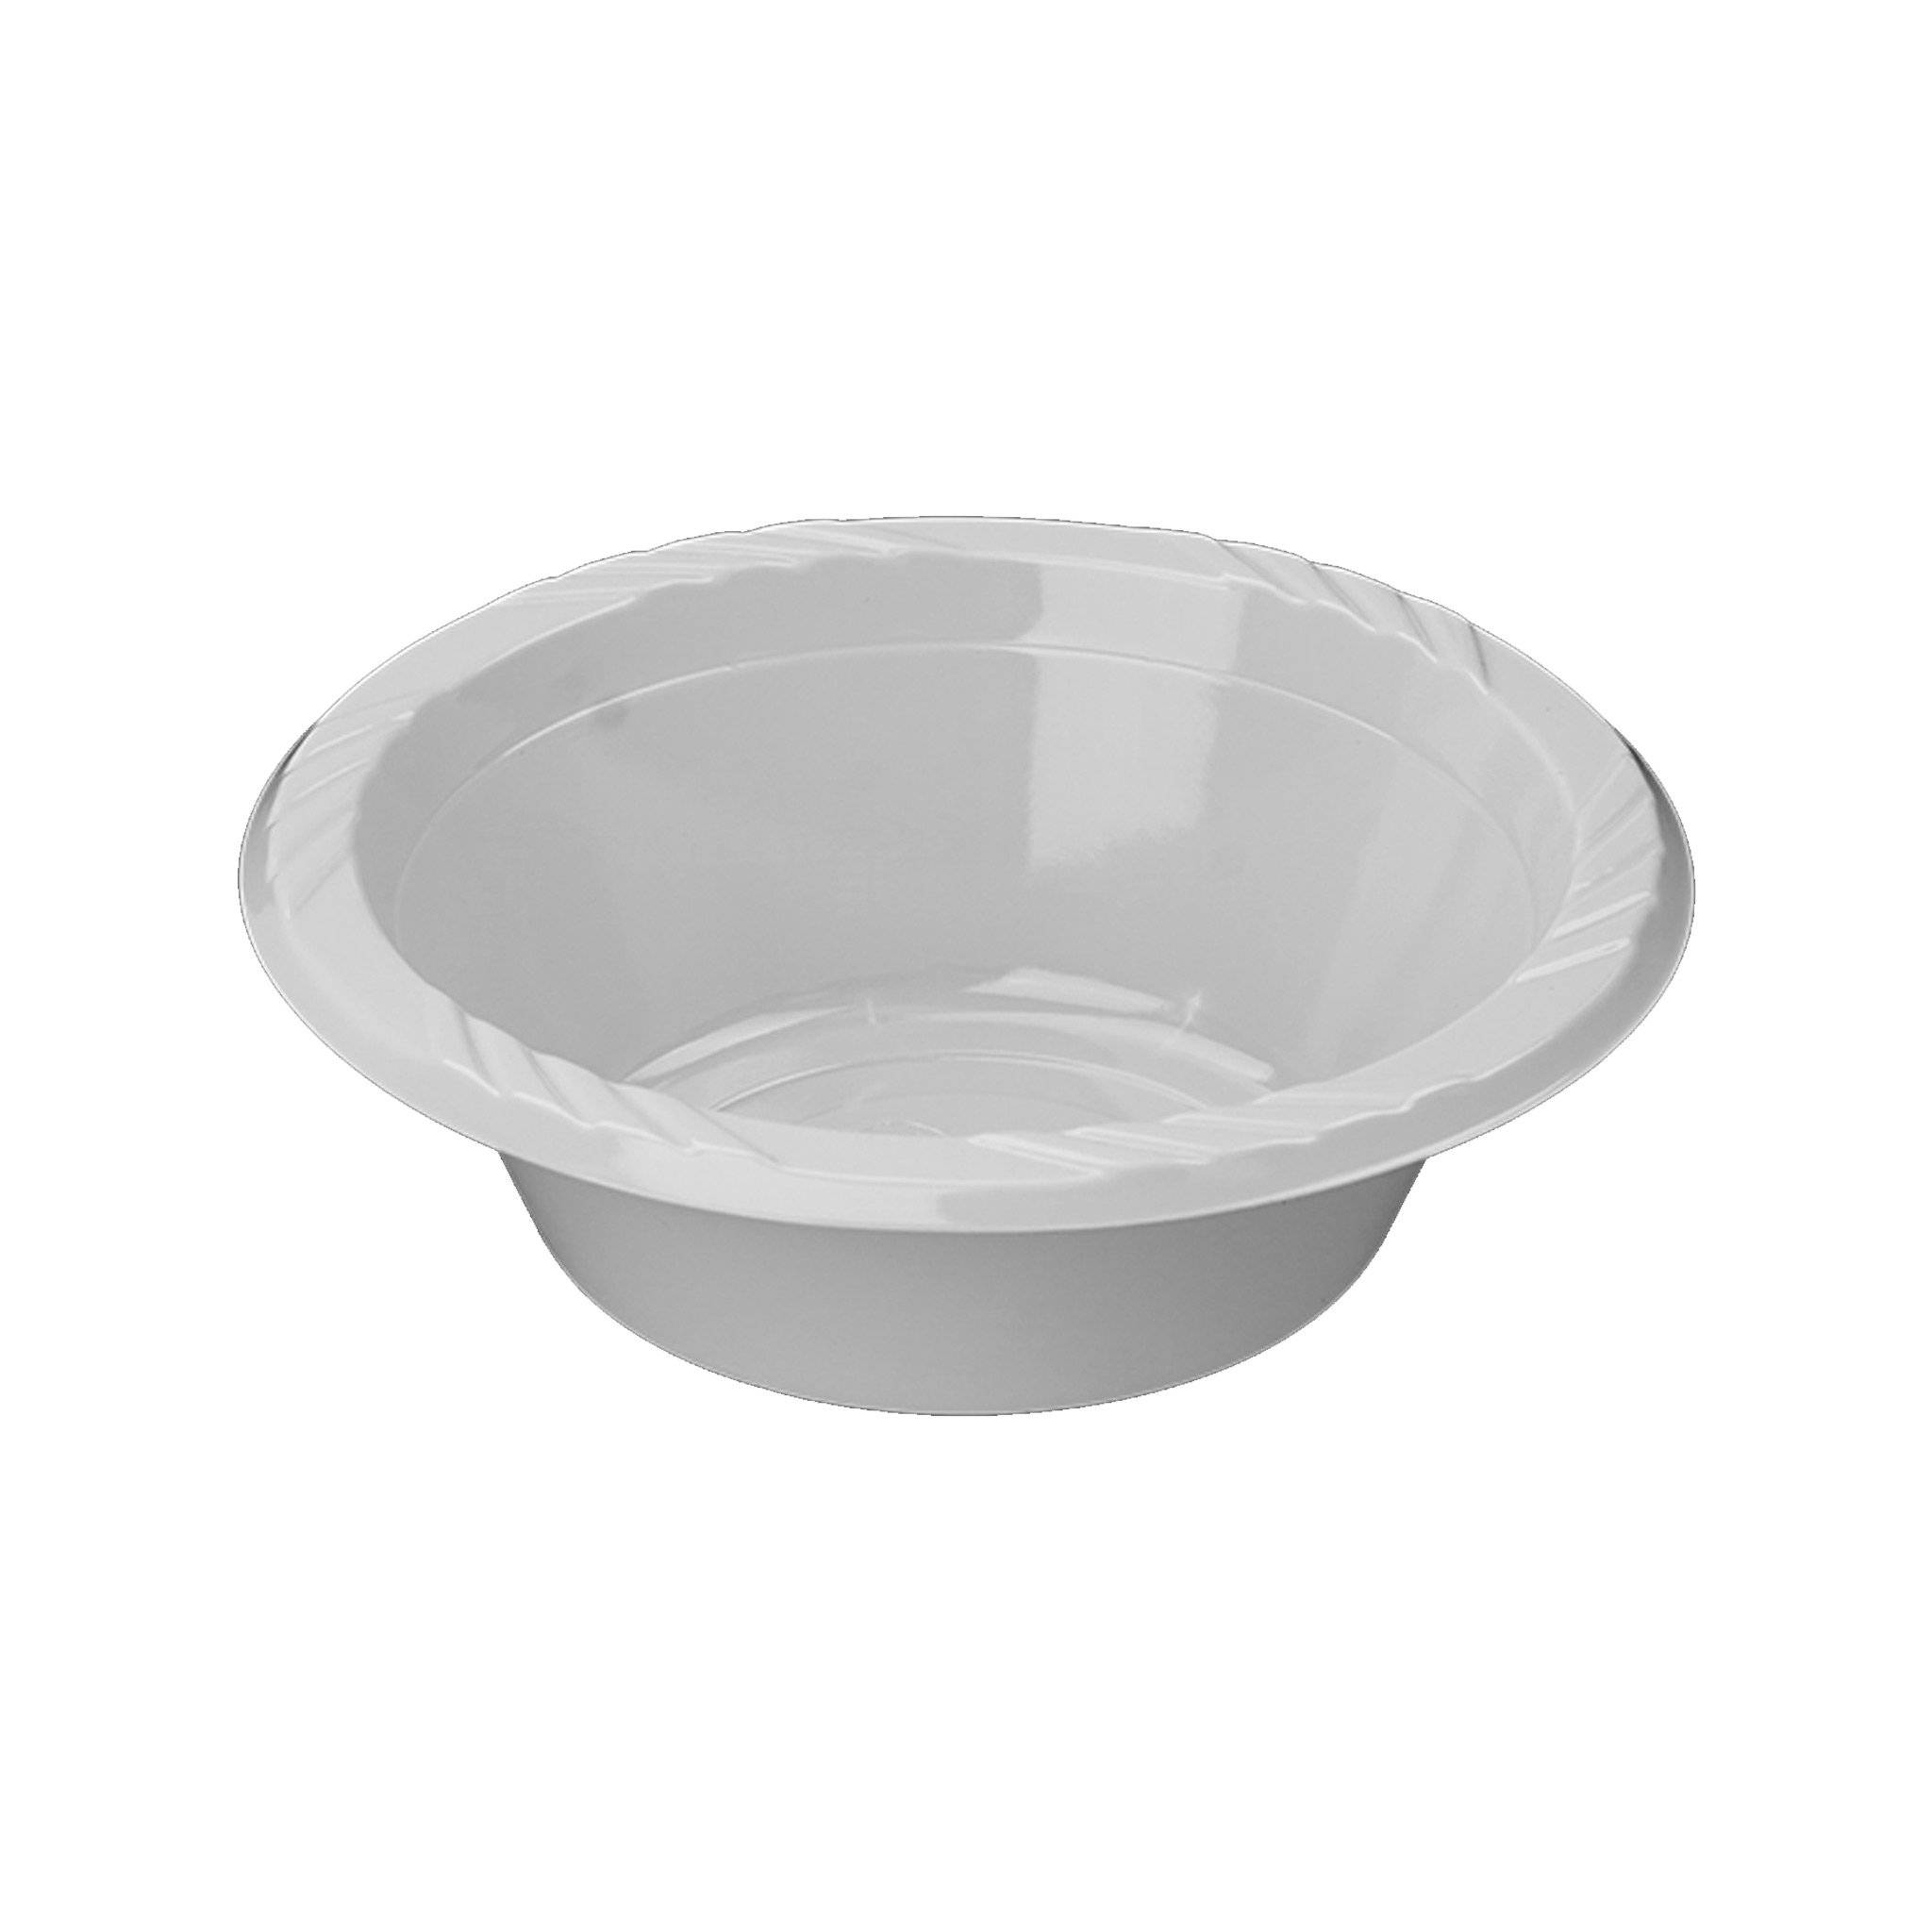 Hotpack | Plastic White Bowl 8 oz | 1000 Pieces - Hotpack Global